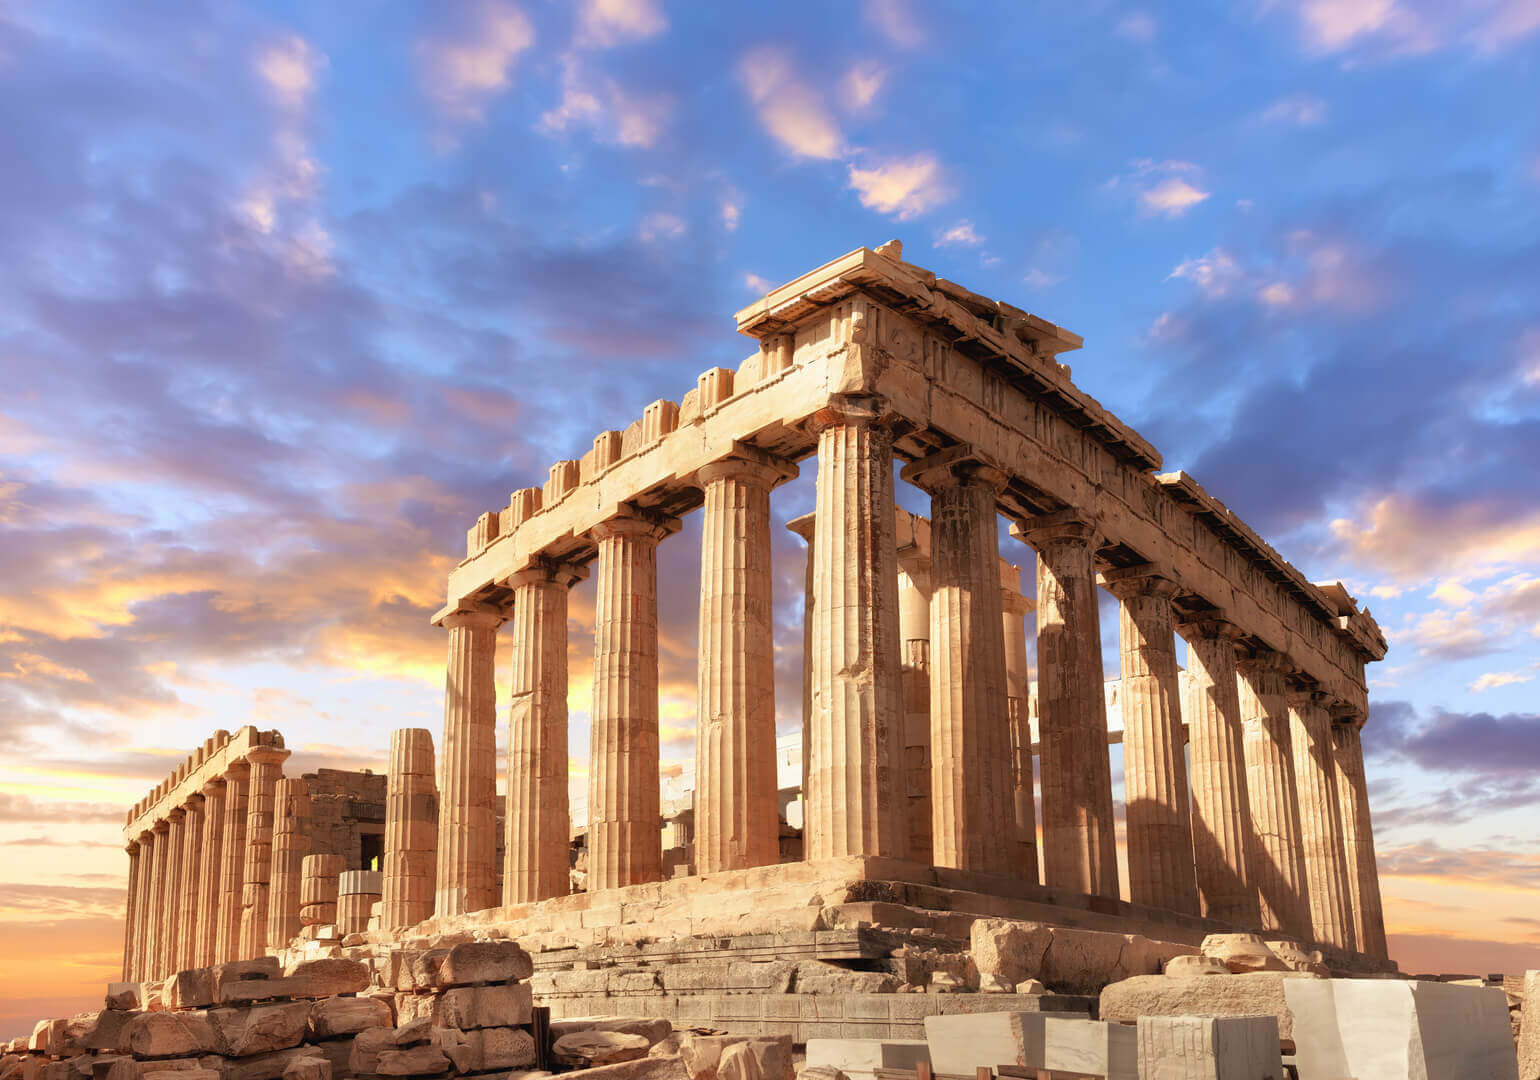 Parthenon temple on a sunset. Acropolis in Athens, Greece.